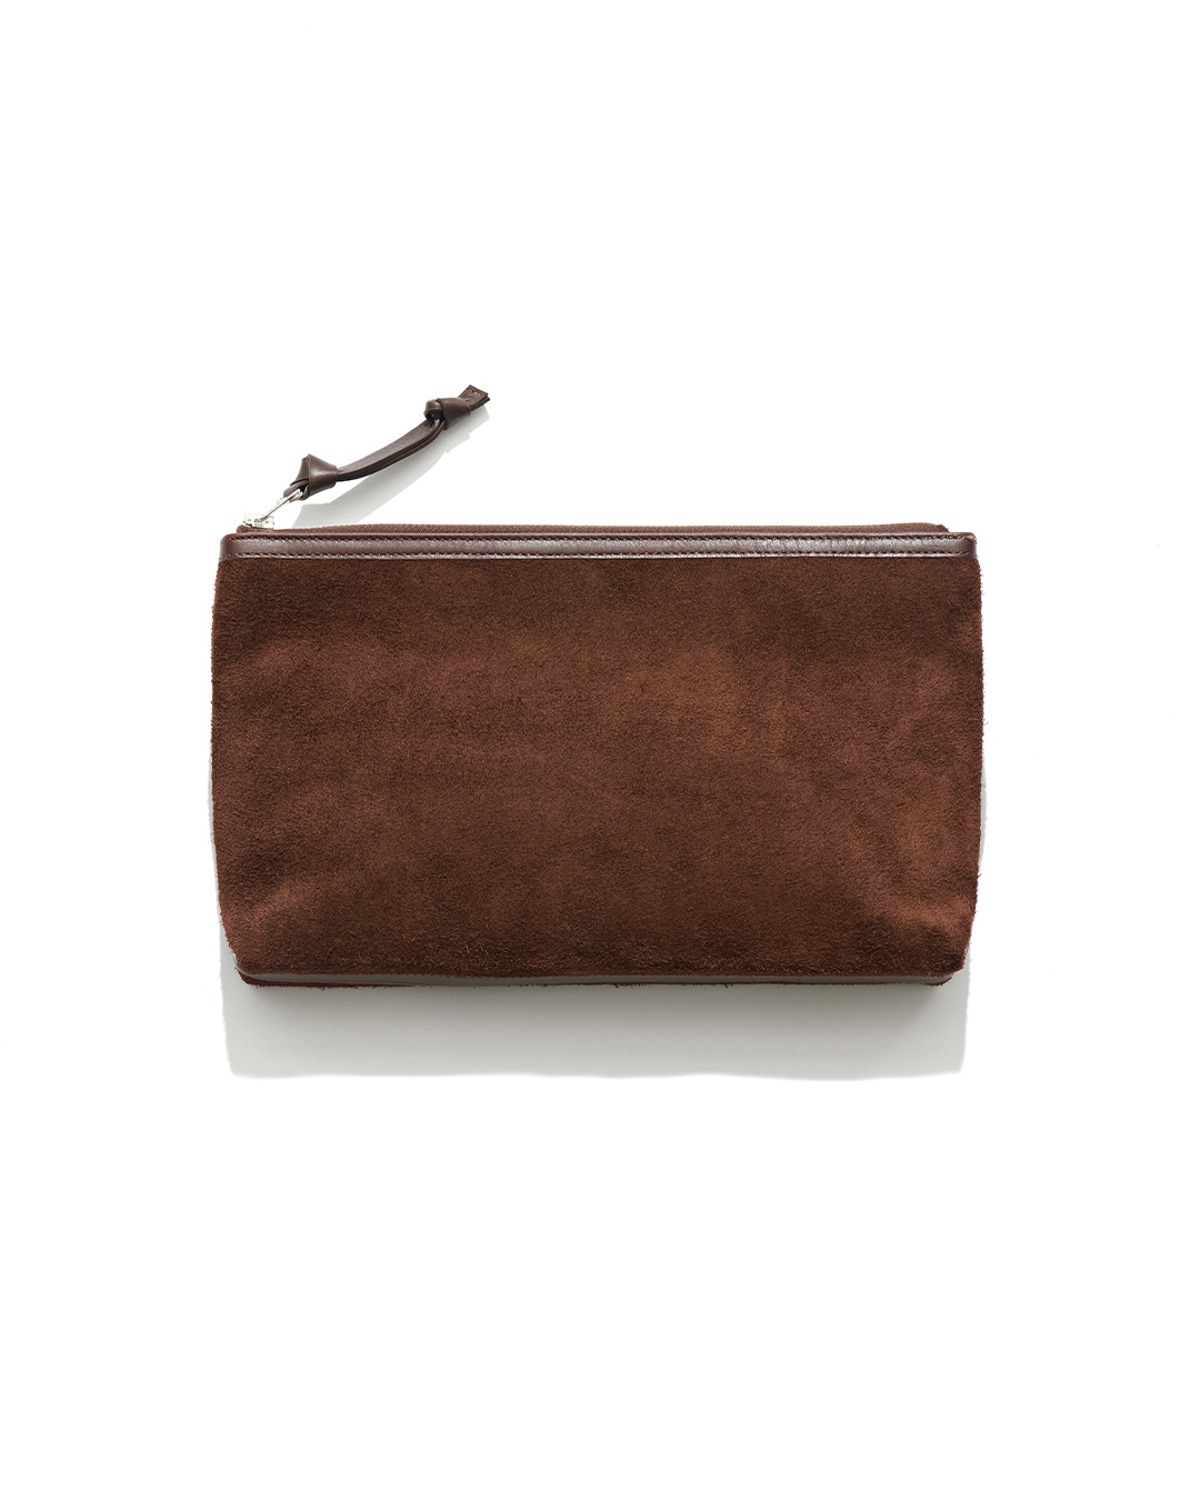 DOCUMENT POUCH / BROWN NUBUK